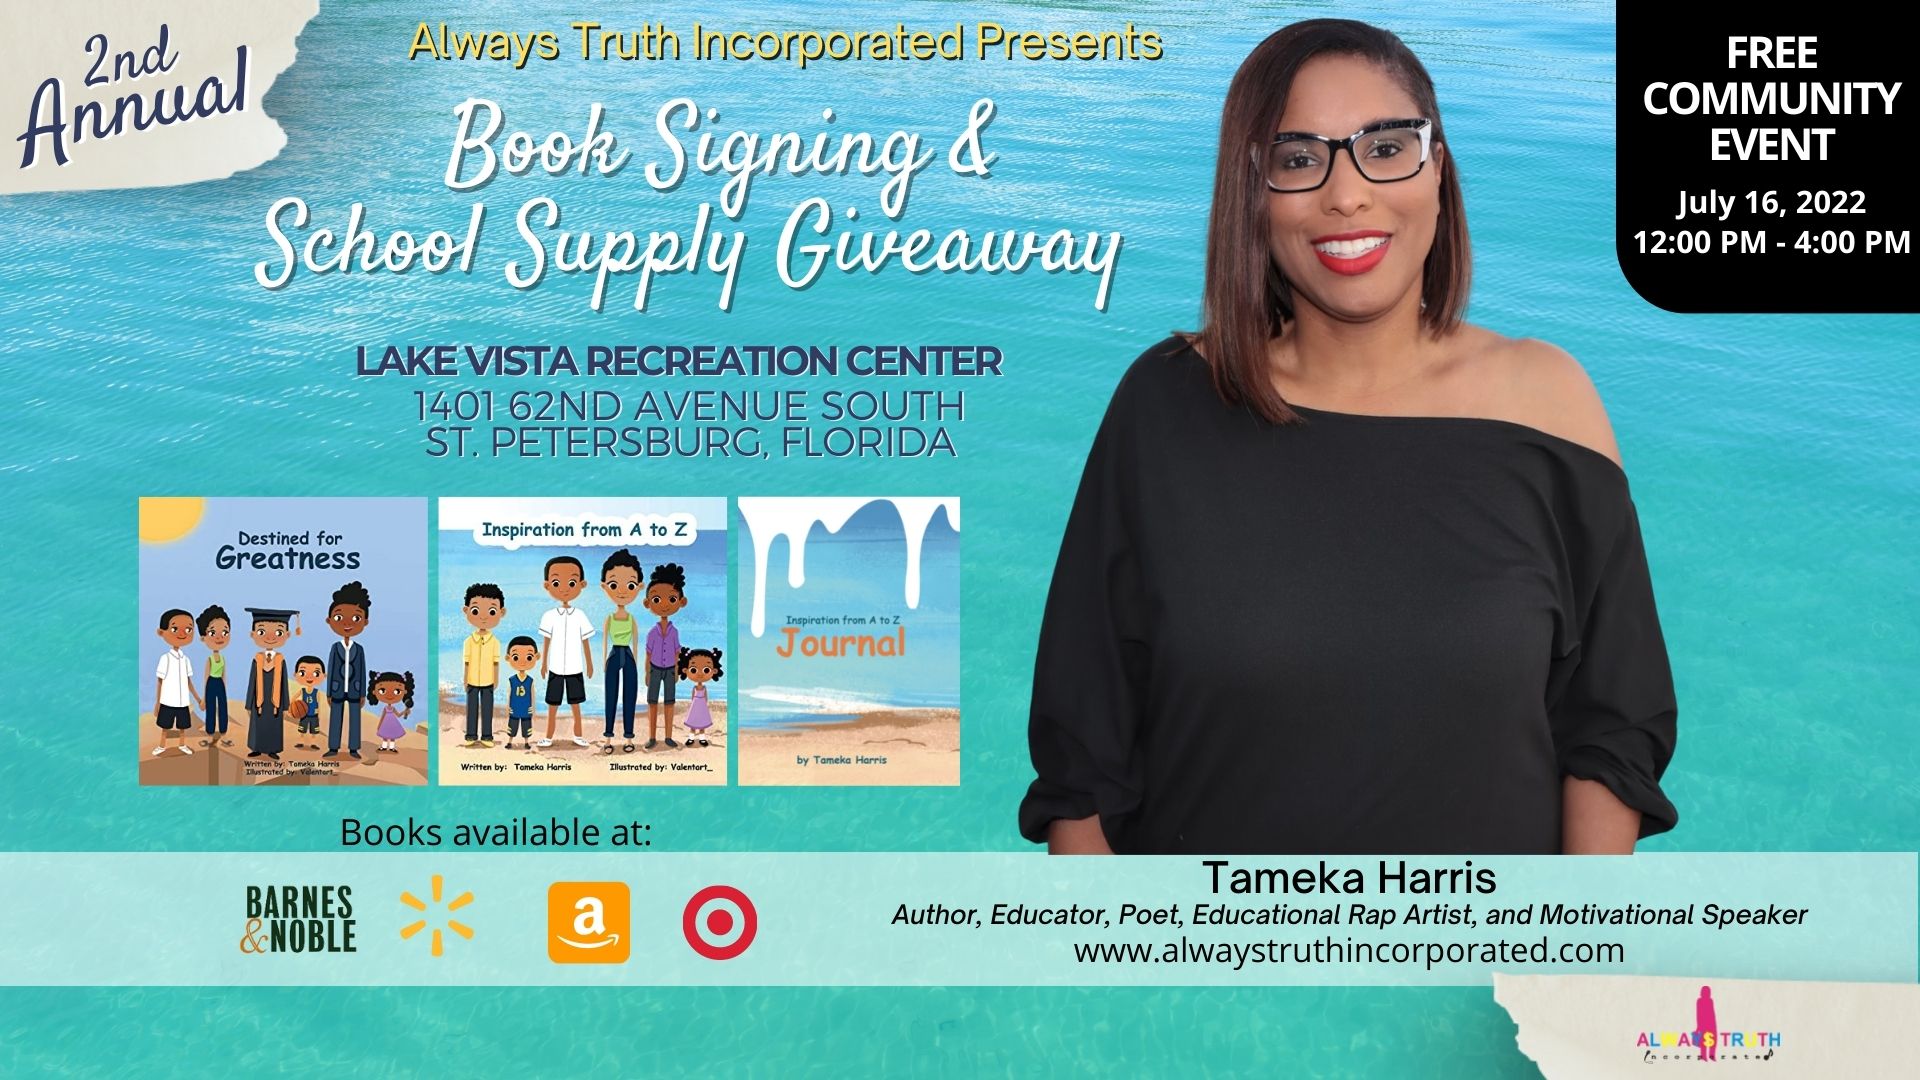 2nd Annual Book Signing and School Supply Giveaway Vendor